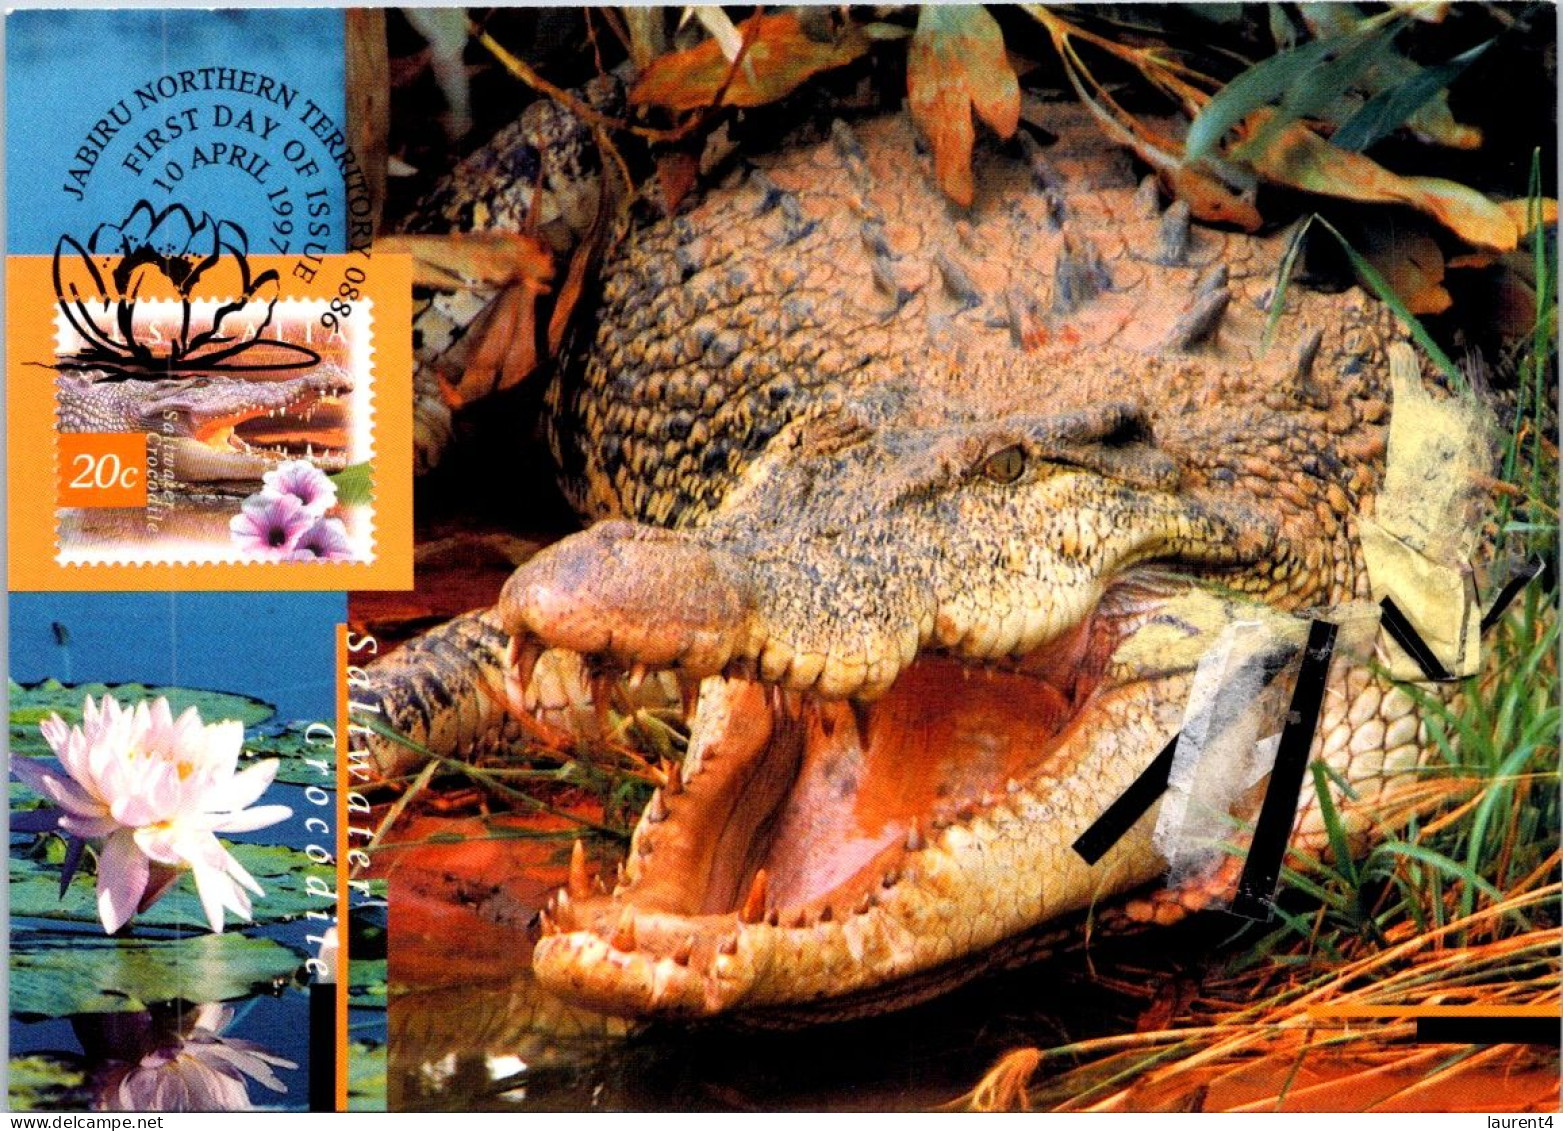 10-5-2024 (4 Z 38) Australia (1 Card) Maxicard (if Not Sold Will NOT Be Re-listed) Saltwater Crocodile - Cartas Máxima